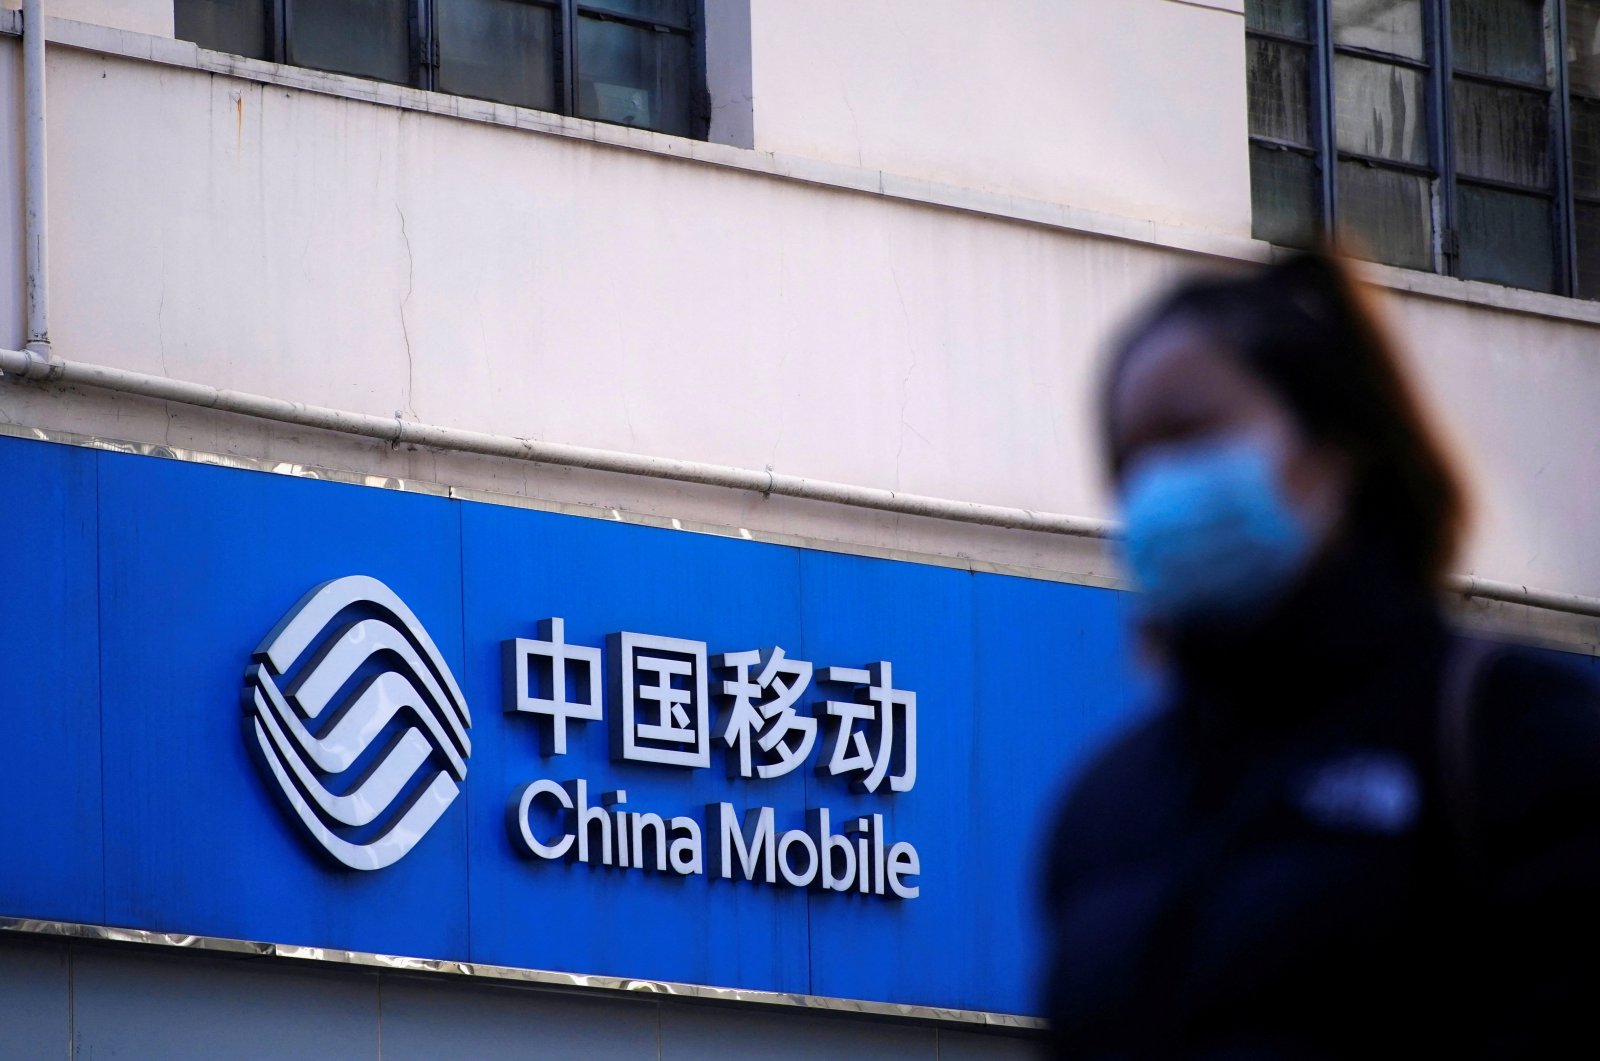 A sign of China Mobile is seen on a street, during the coronavirus disease (COVID-19) outbreak in Shanghai, China, Jan. 8, 2021. (Reuters Photo)